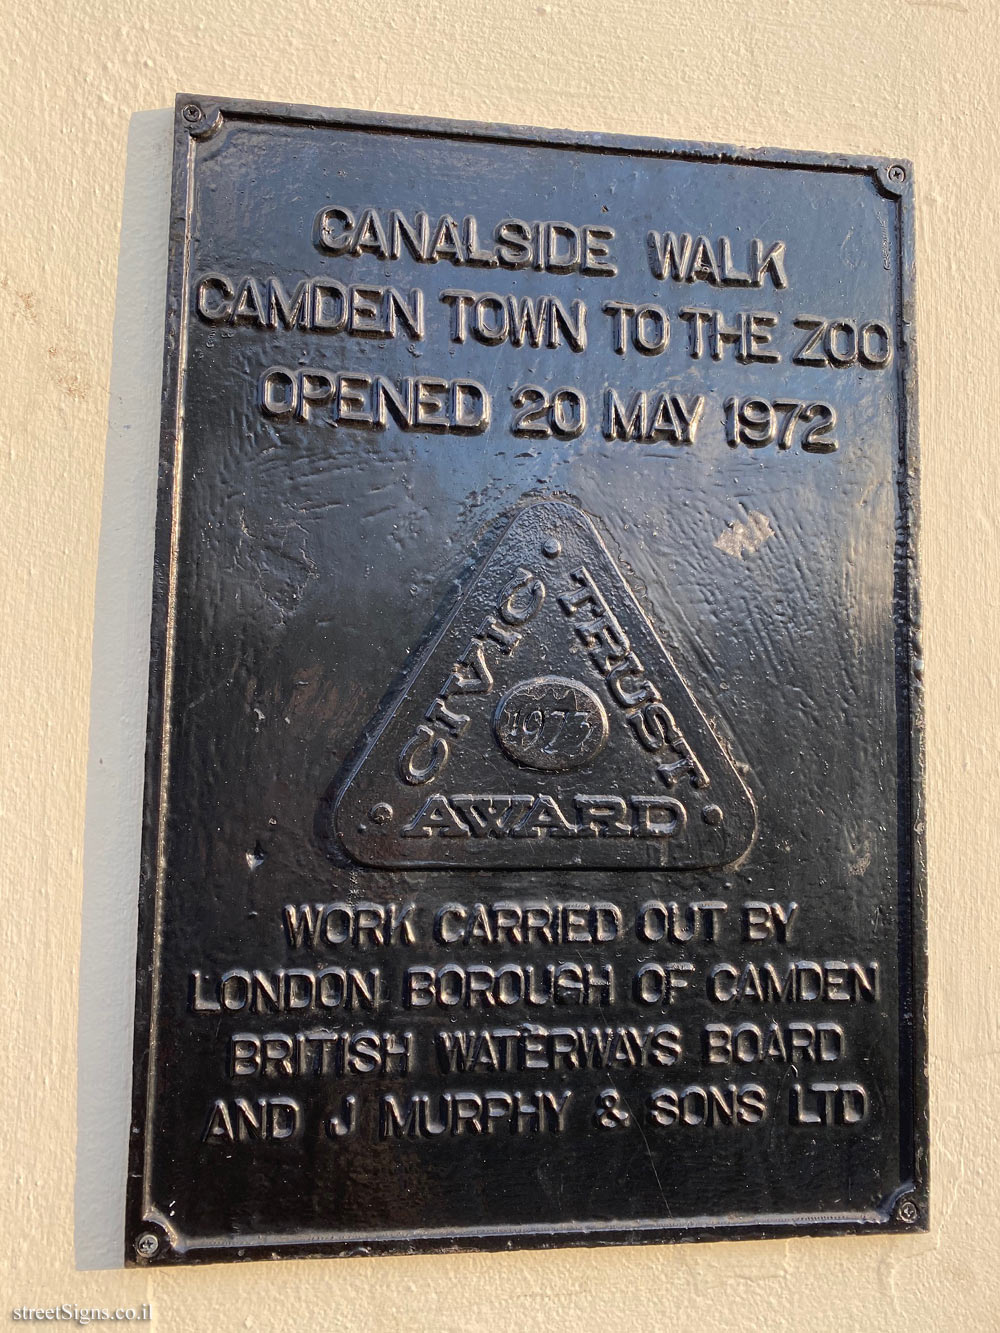 London - Camden - Walking route along the canal